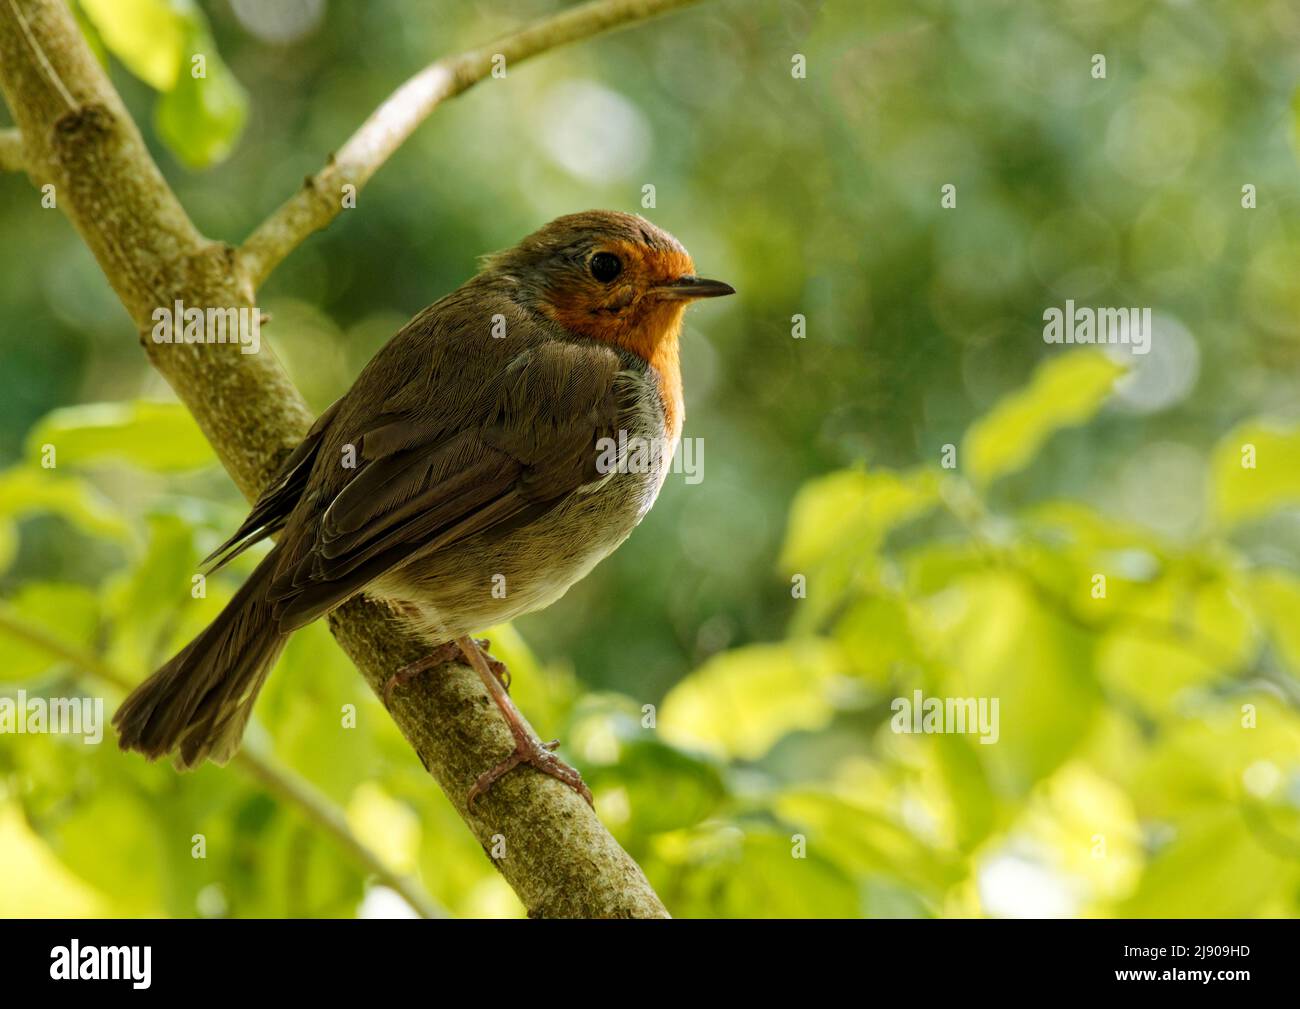 European Robin (Erithacus rubecula) or Robin Red Breast is a common bird ikn English gardens. A friendly bird it sings all year round. Stock Photo